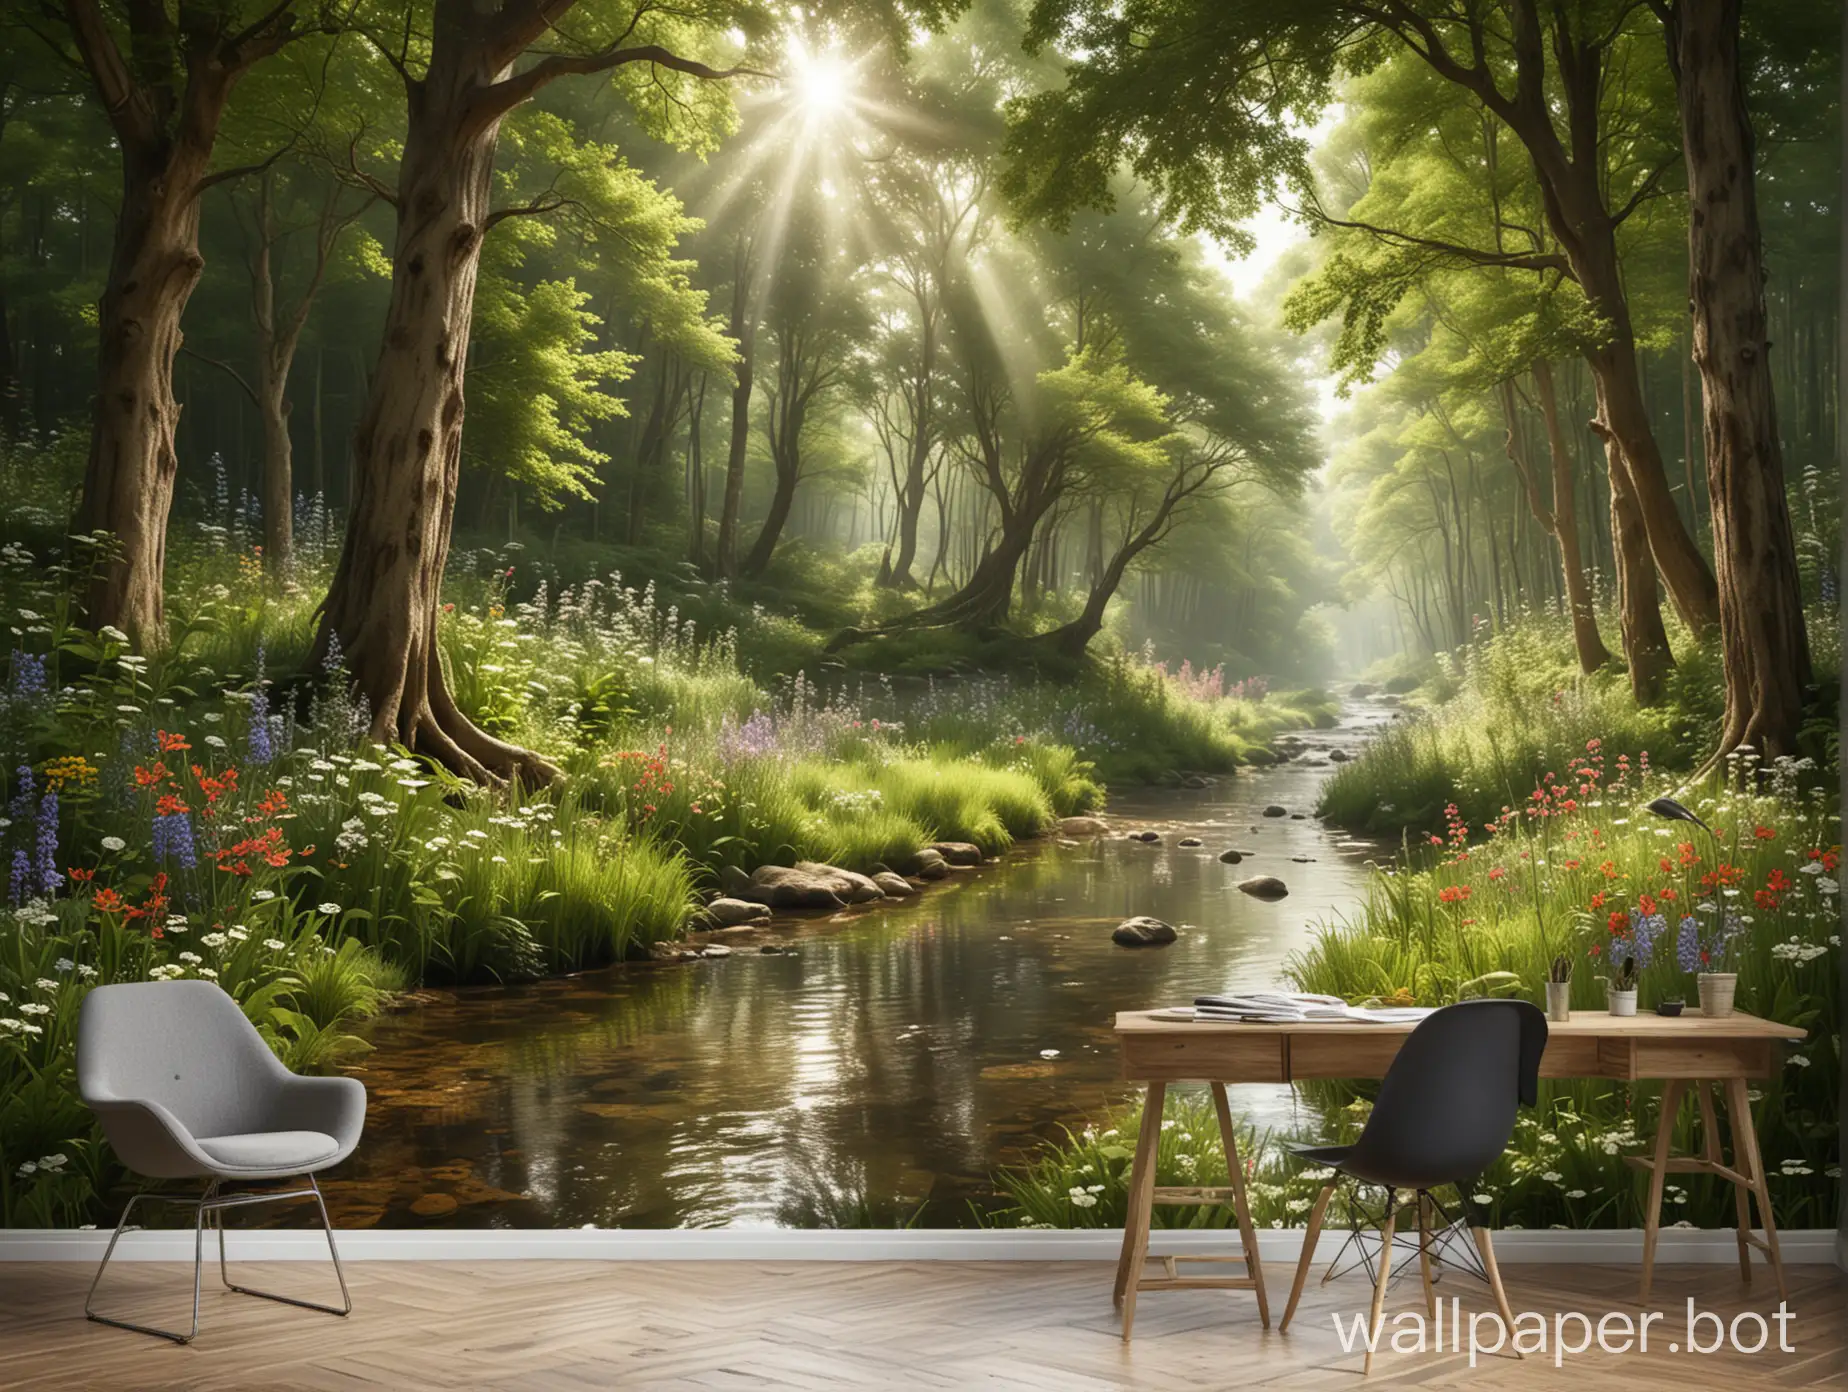 Create a 3D wallpaper design featuring a serene forest scene, with towering trees casting dappled sunlight onto a meandering stream, surrounded by lush greenery and vibrant wildflowers. The depth and intricacy of the design should make the viewer feel like they're stepping into a tranquil woodland paradise every time they glance at their walls.